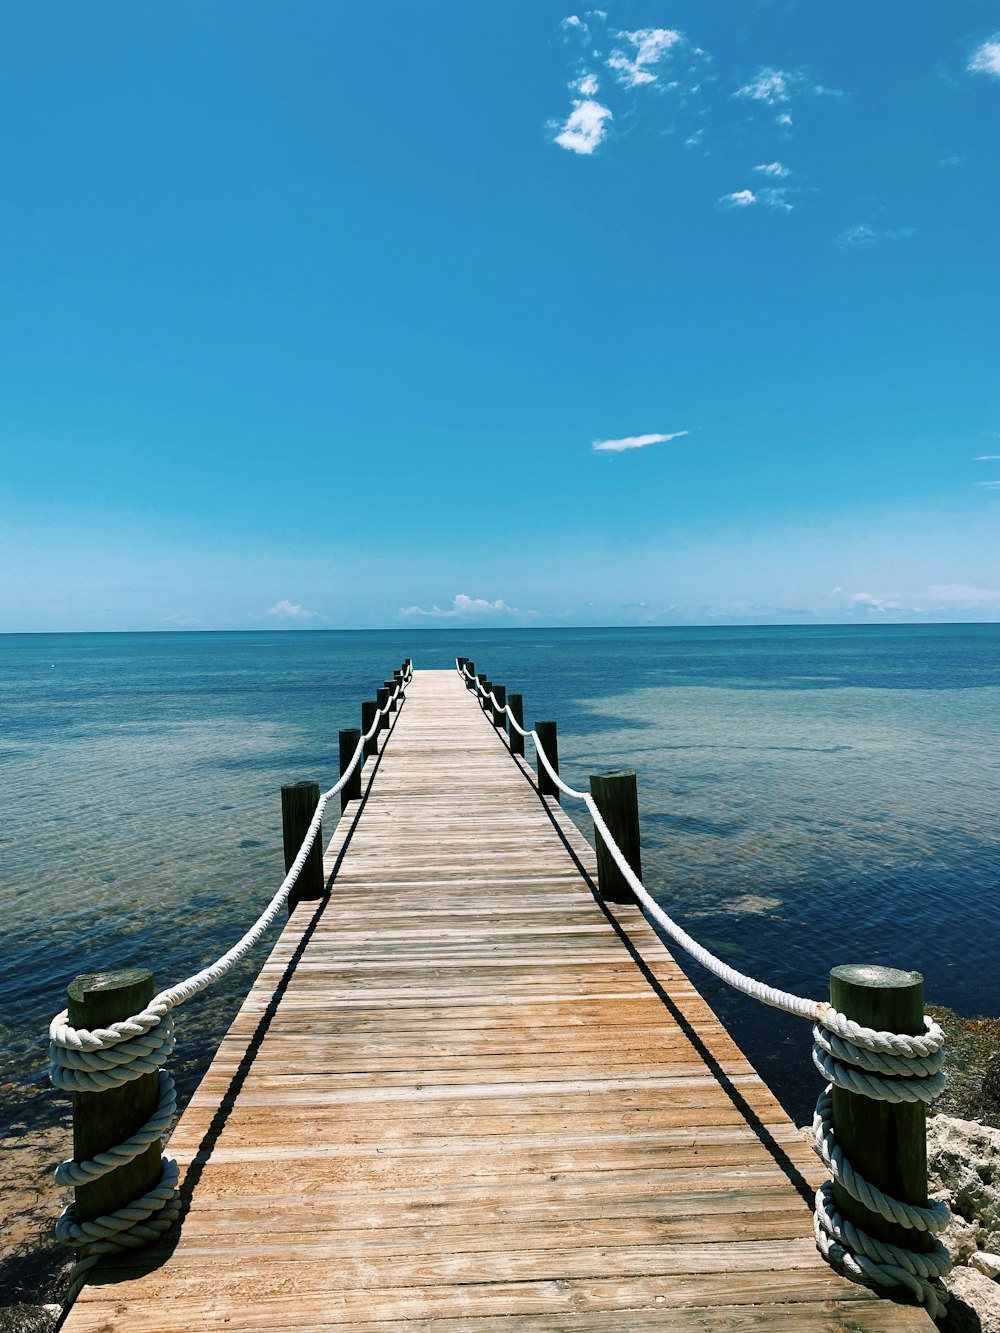 a wooden pier extending into the ocean on a sunny day